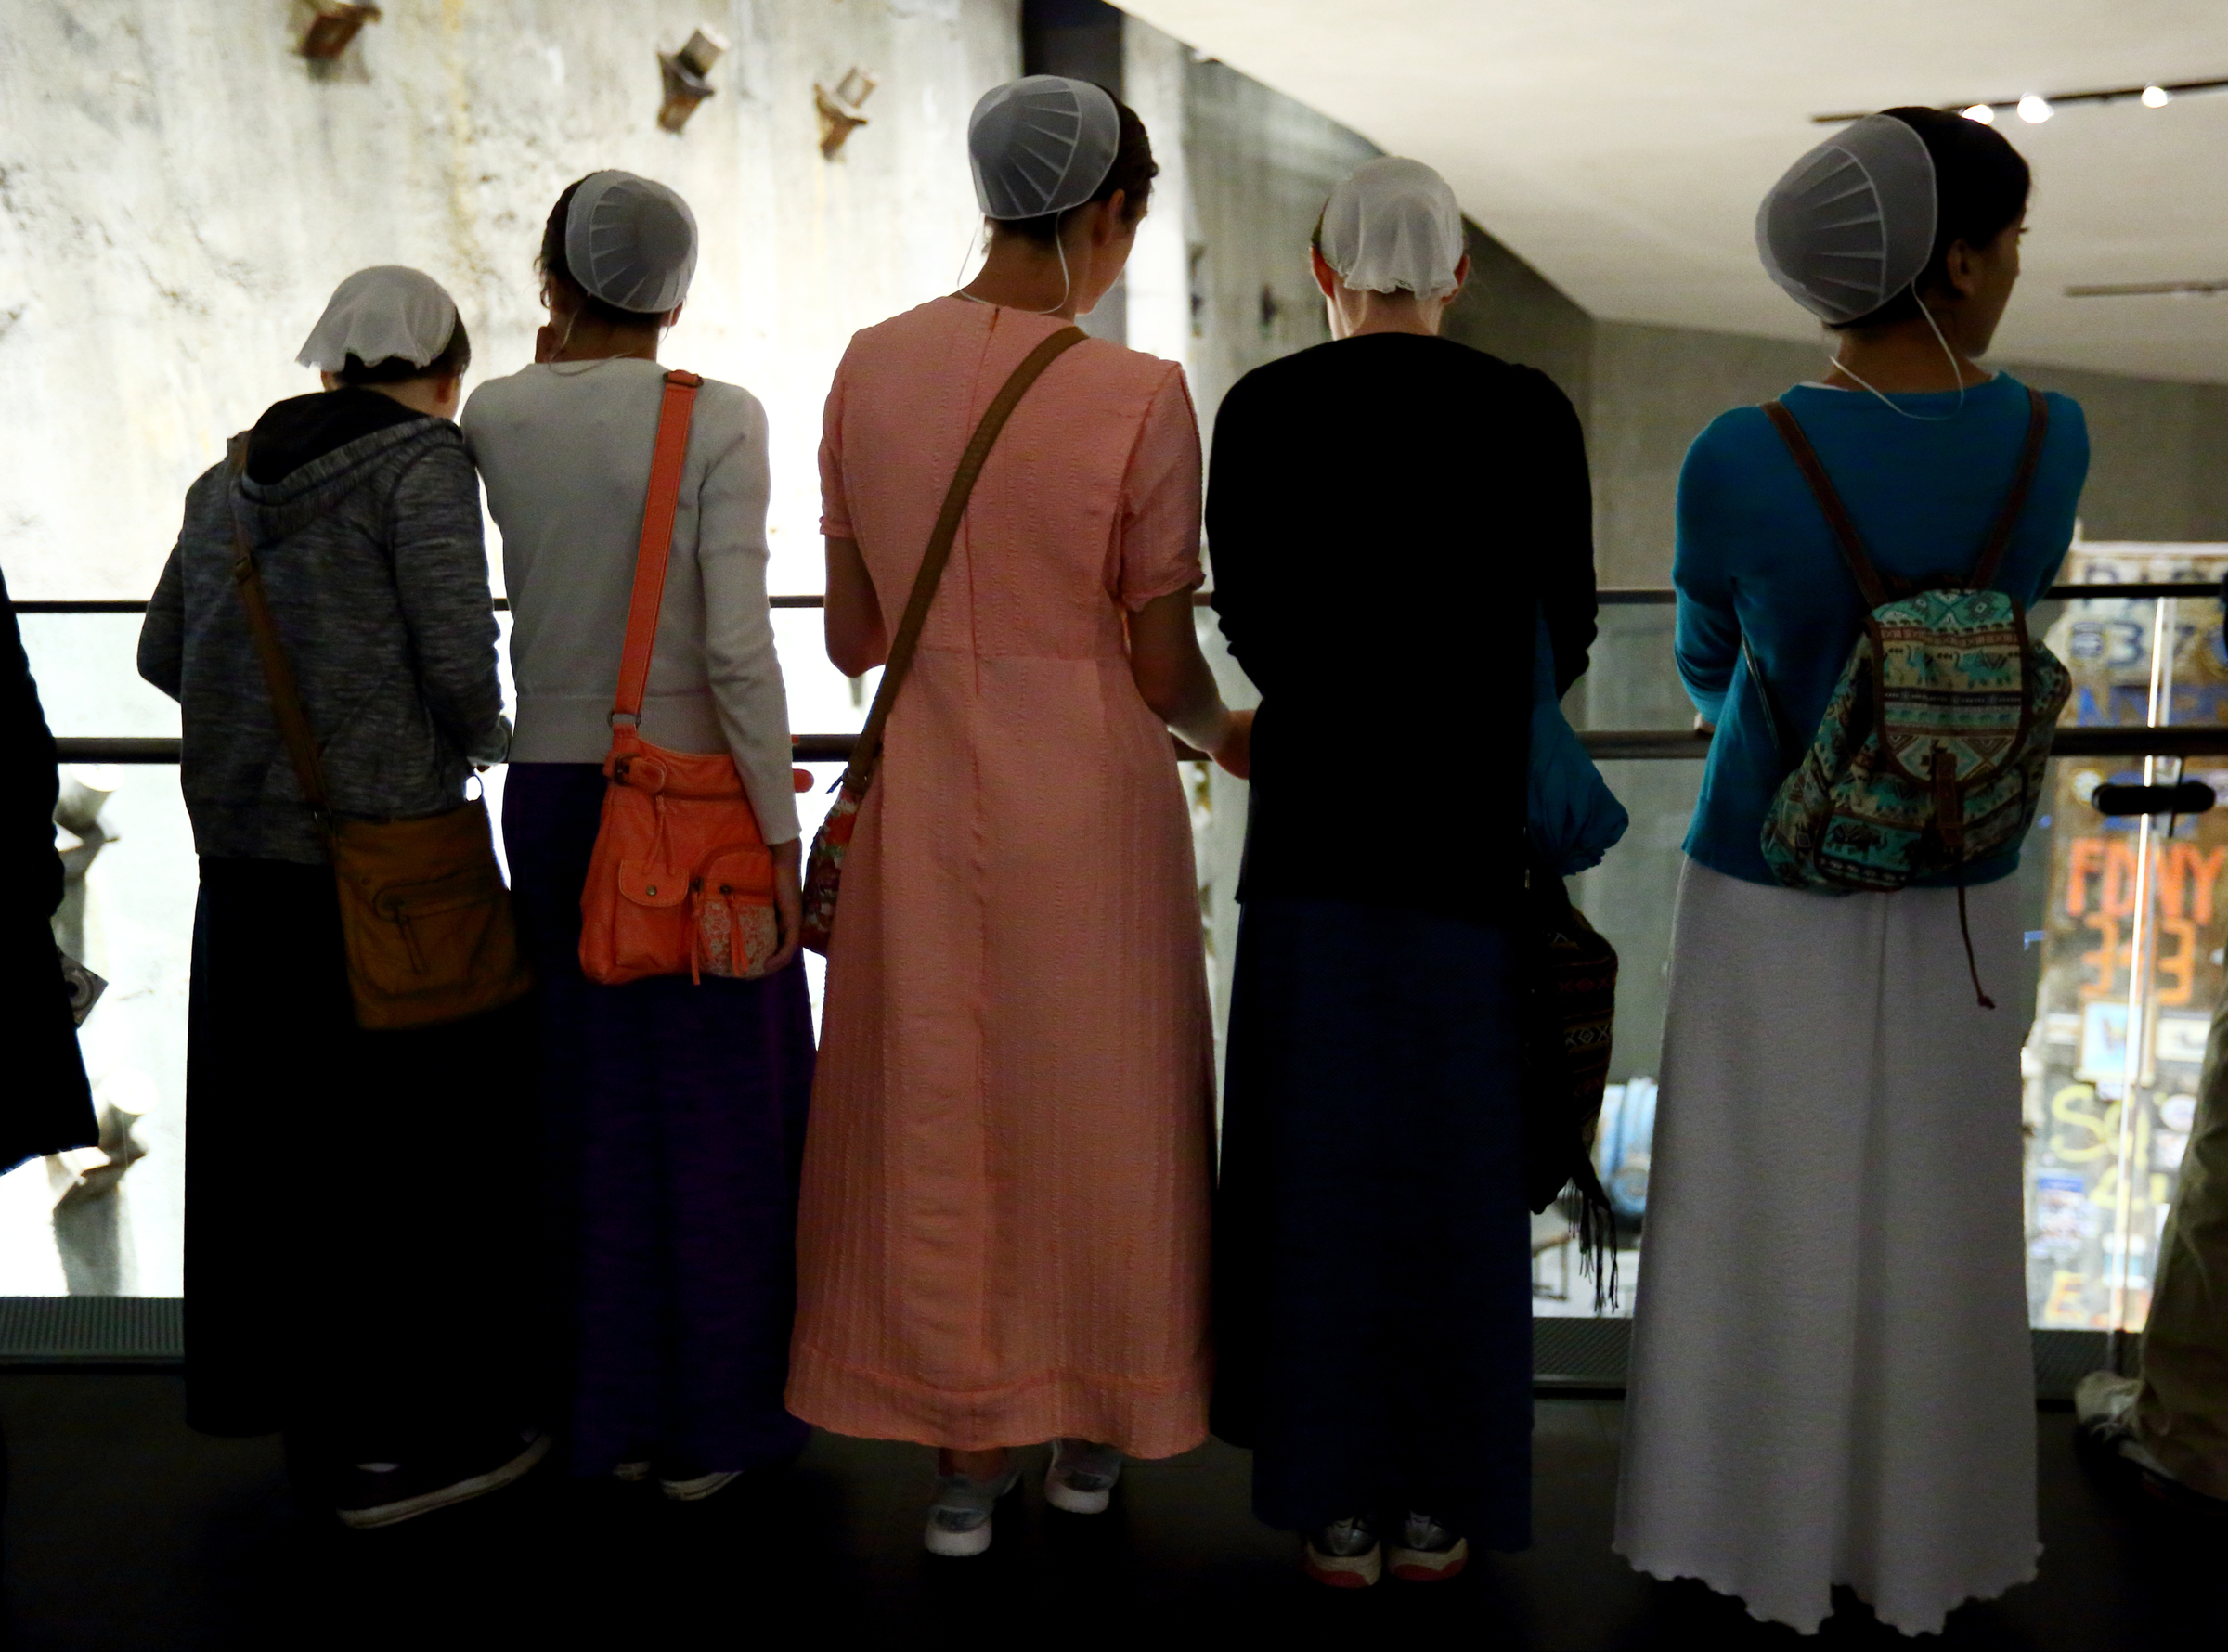 Five women in traditional Mennonite dresses look down from the ramp in Foundation Hall to view the slurry wall and Last Column.